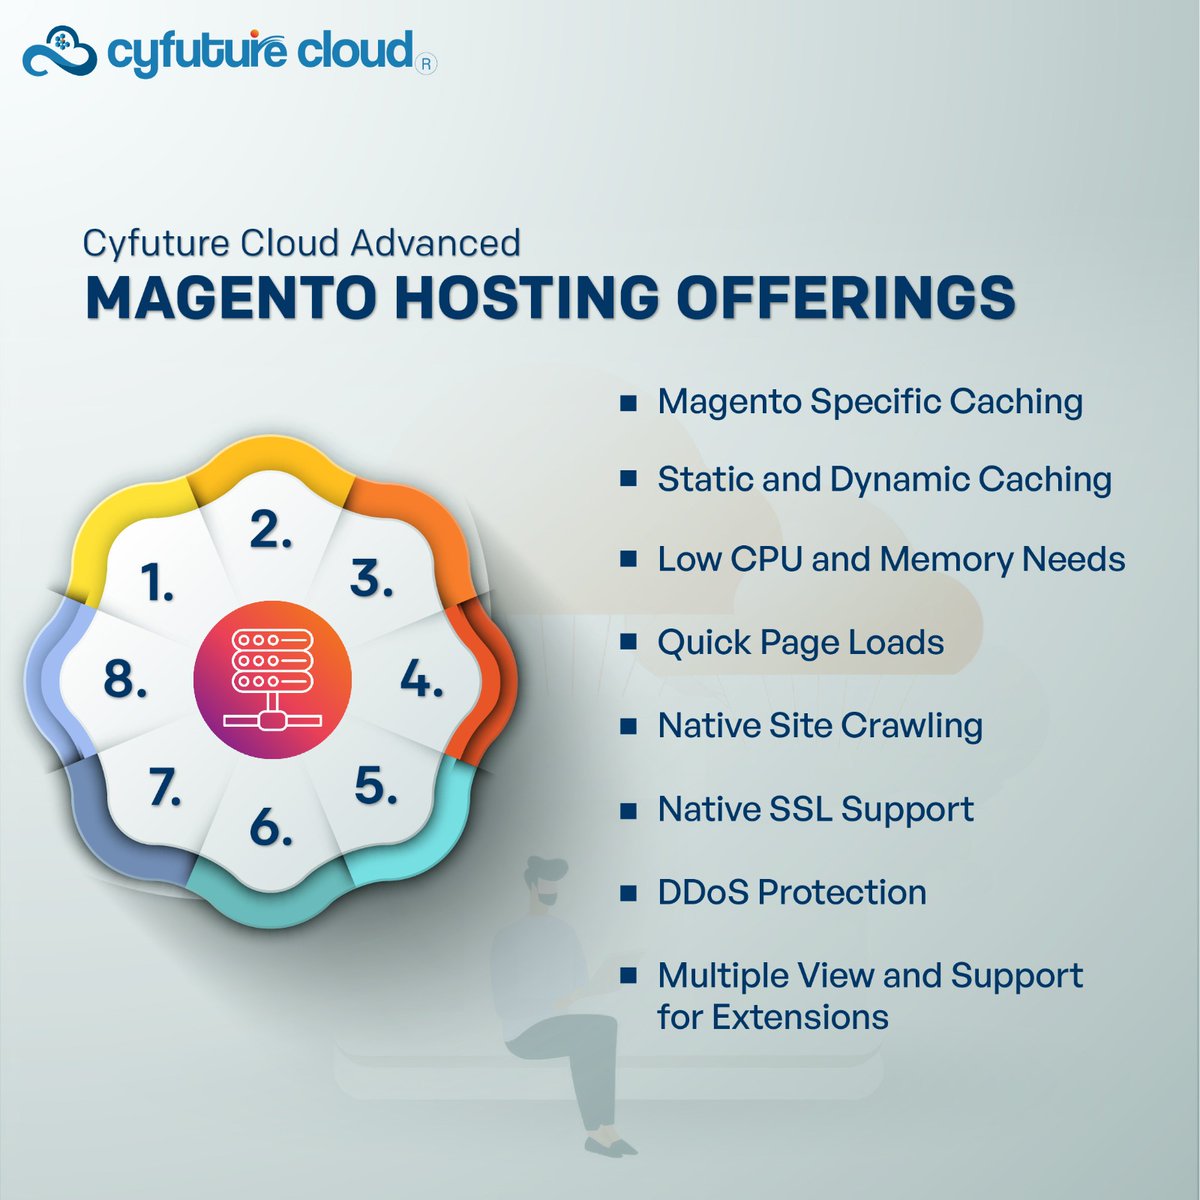 Cyfuture Cloud has you covered for lightning-fast page loads and top-notch security, from Magento-specific caching to native SSL support. Explore more: cyfuture.cloud/magento-hosting

#magentocloudhosting #cloudhosting #fastestcloudsolution #cloudservices #cyfuture #cyfuturecloud